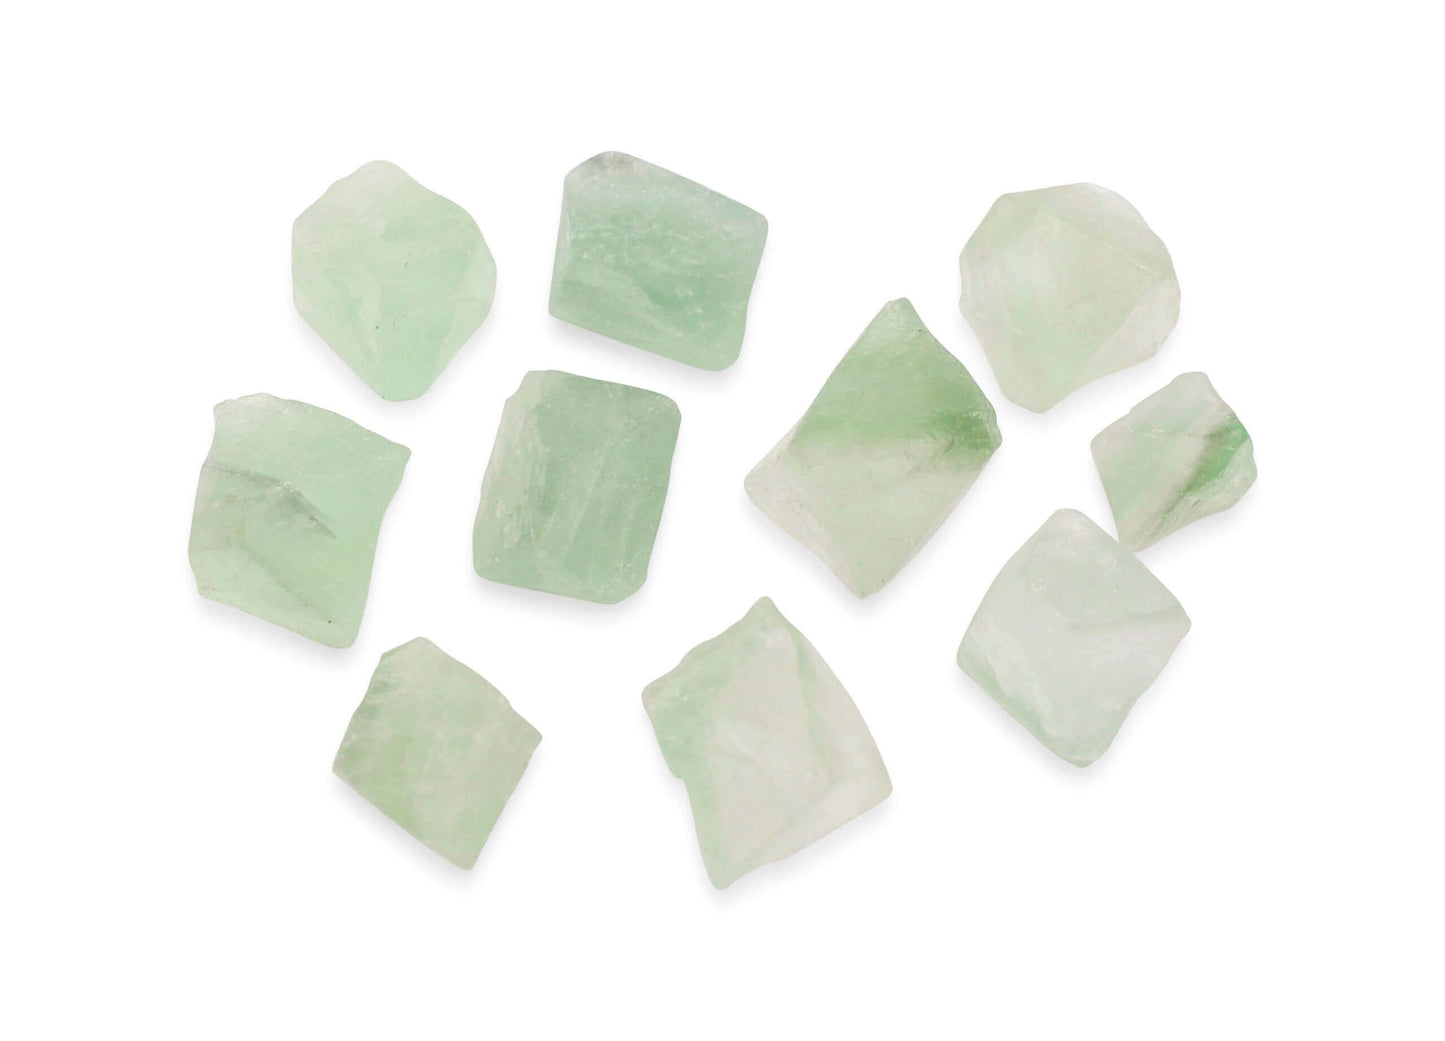 Fluorite octahedron 0.5-1 cm at $2 only from Spiral Rain